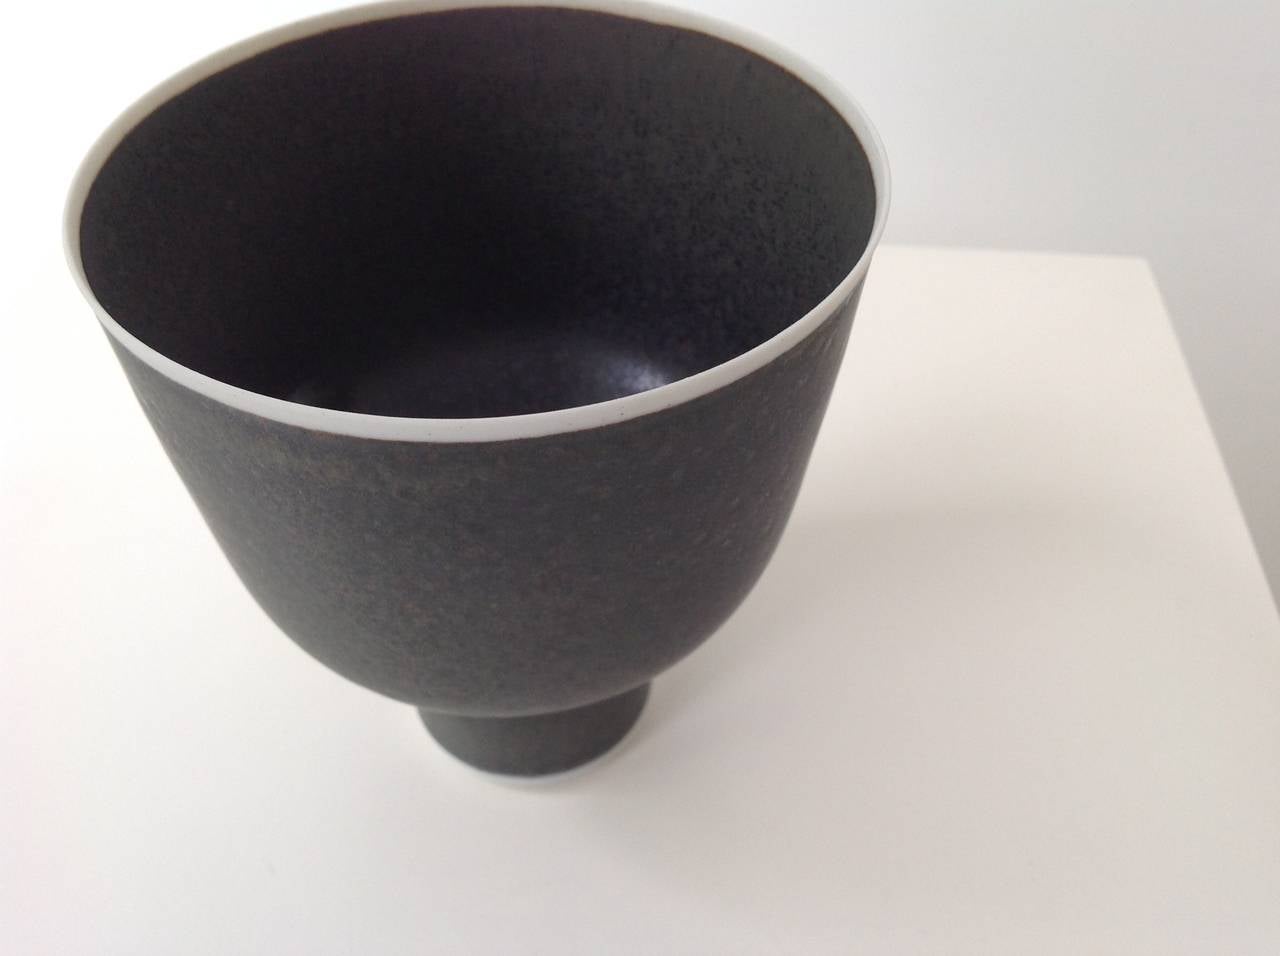 Hand thrown form, one of a kind, small porcelain bowl on foot, white porcelain, black glazed, signed Lap